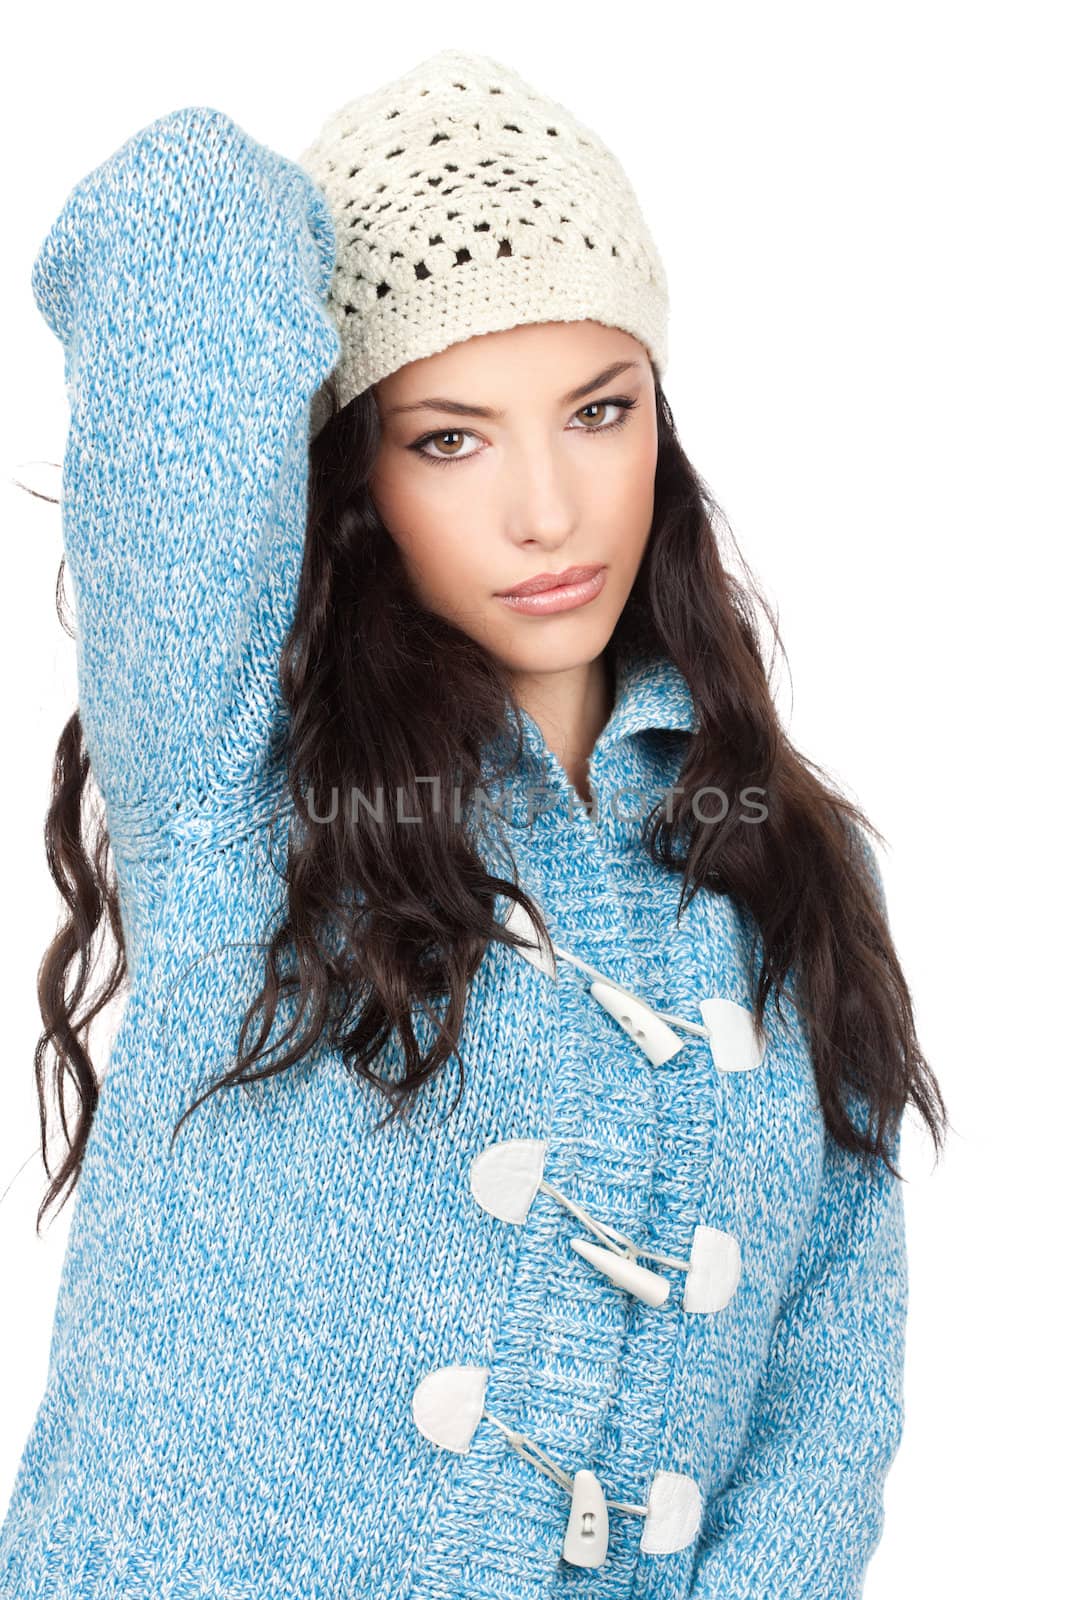 portrait of a young black hair woman in a blue wool sweater, isolated on white background